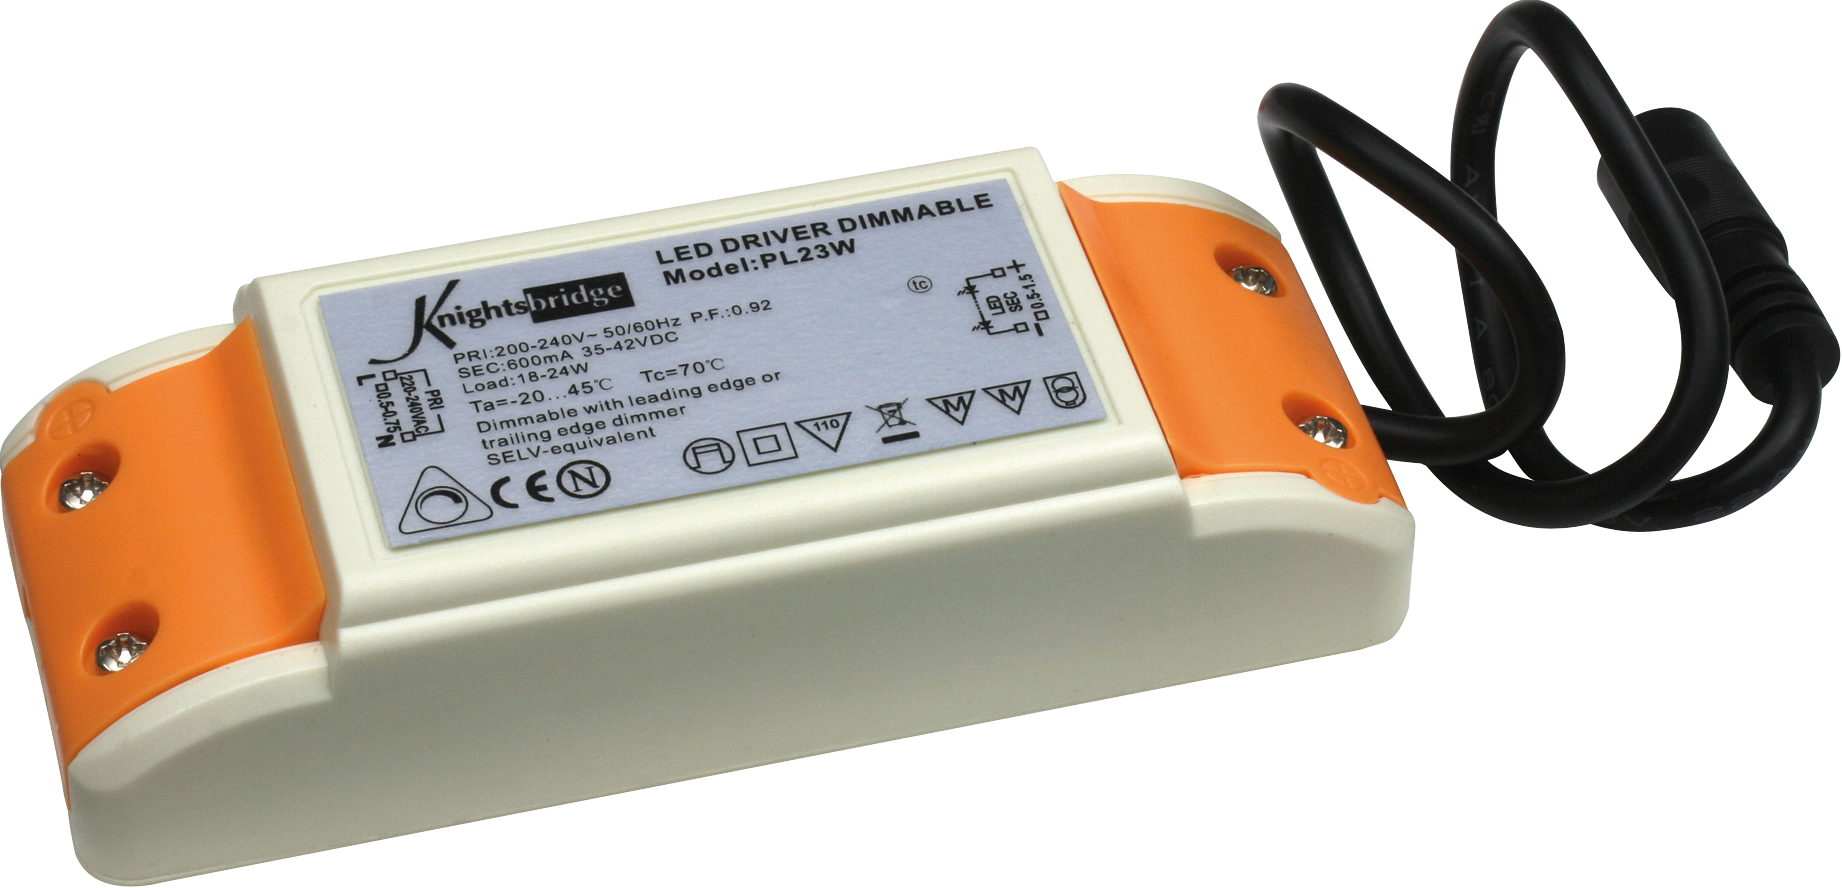 Dimmable LED Driver For Use With PL23LED - PLD23W 